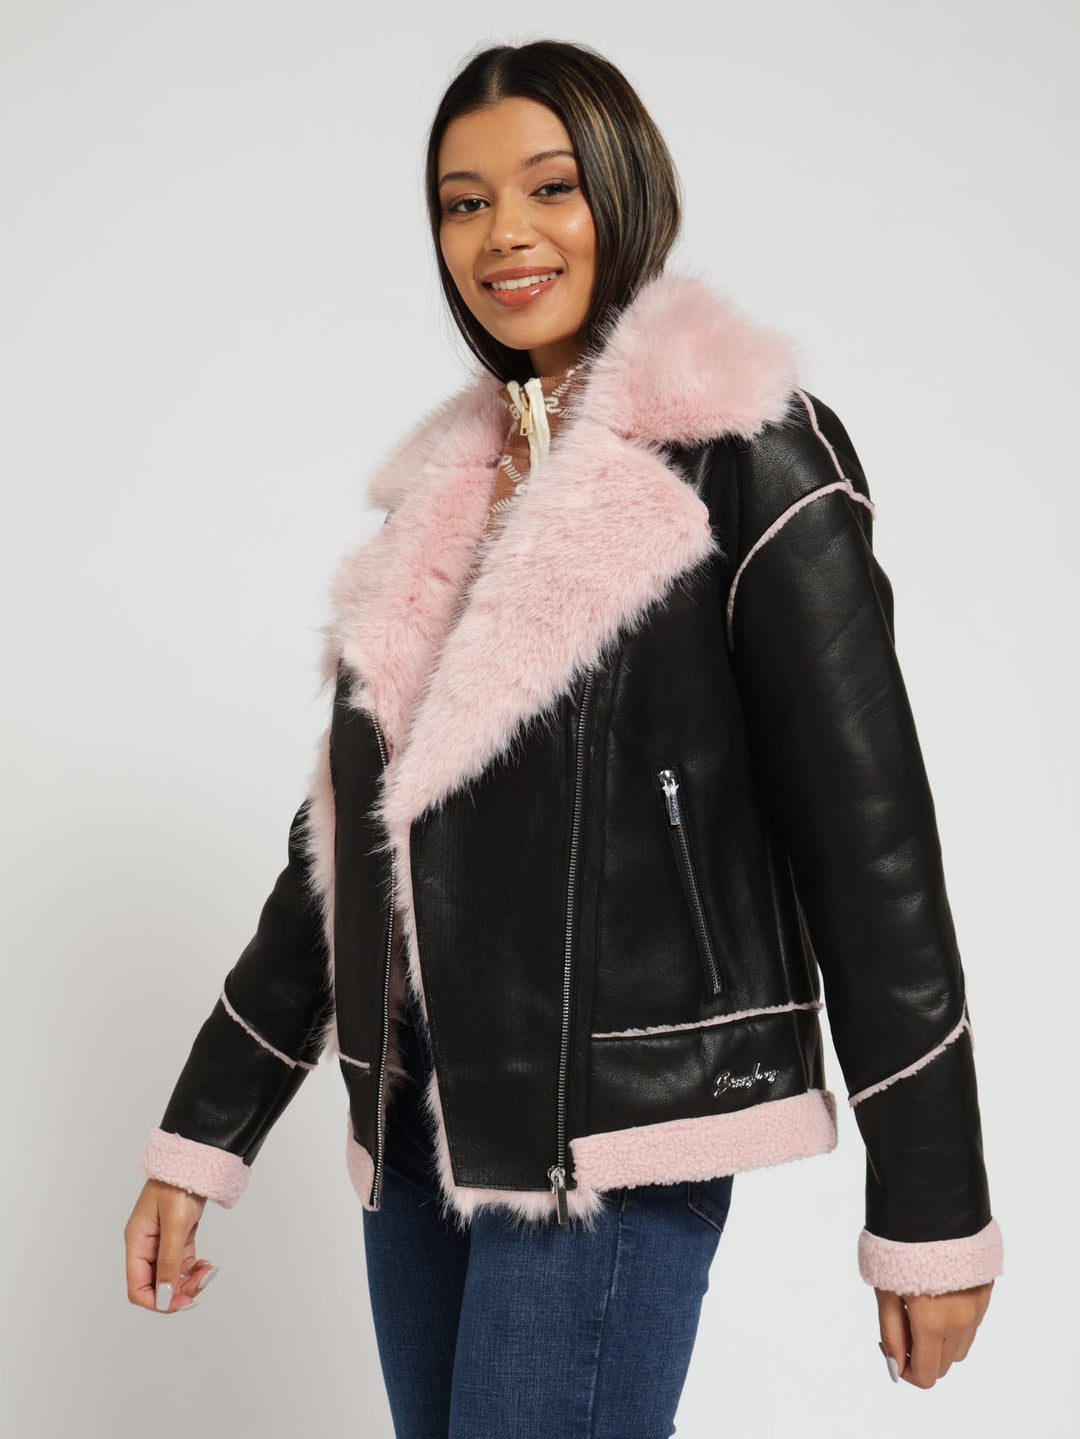 Shearling Jacket With Fur Contrast - Black